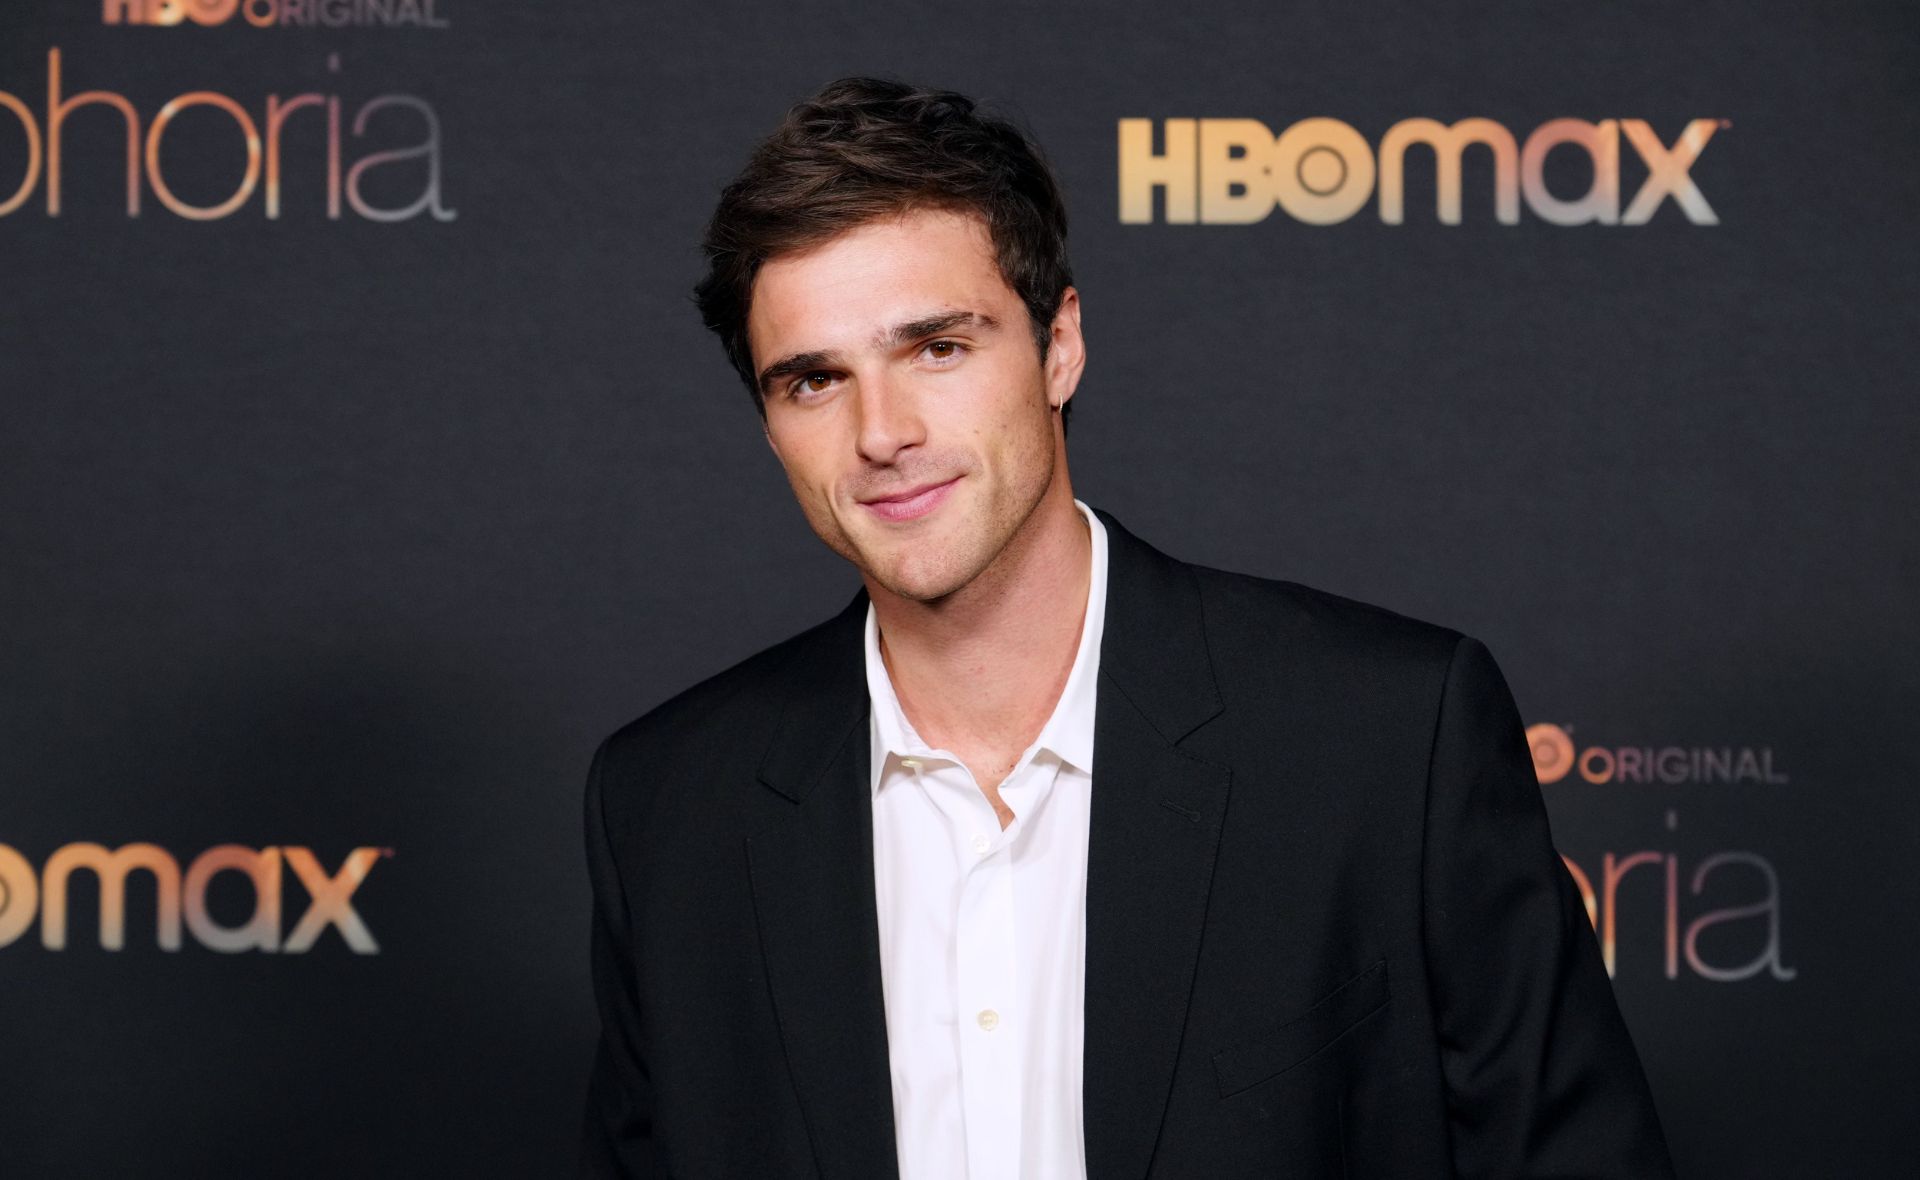 Who is Jacob Elordi’s current girlfriend? A recap of the actor’s dating history